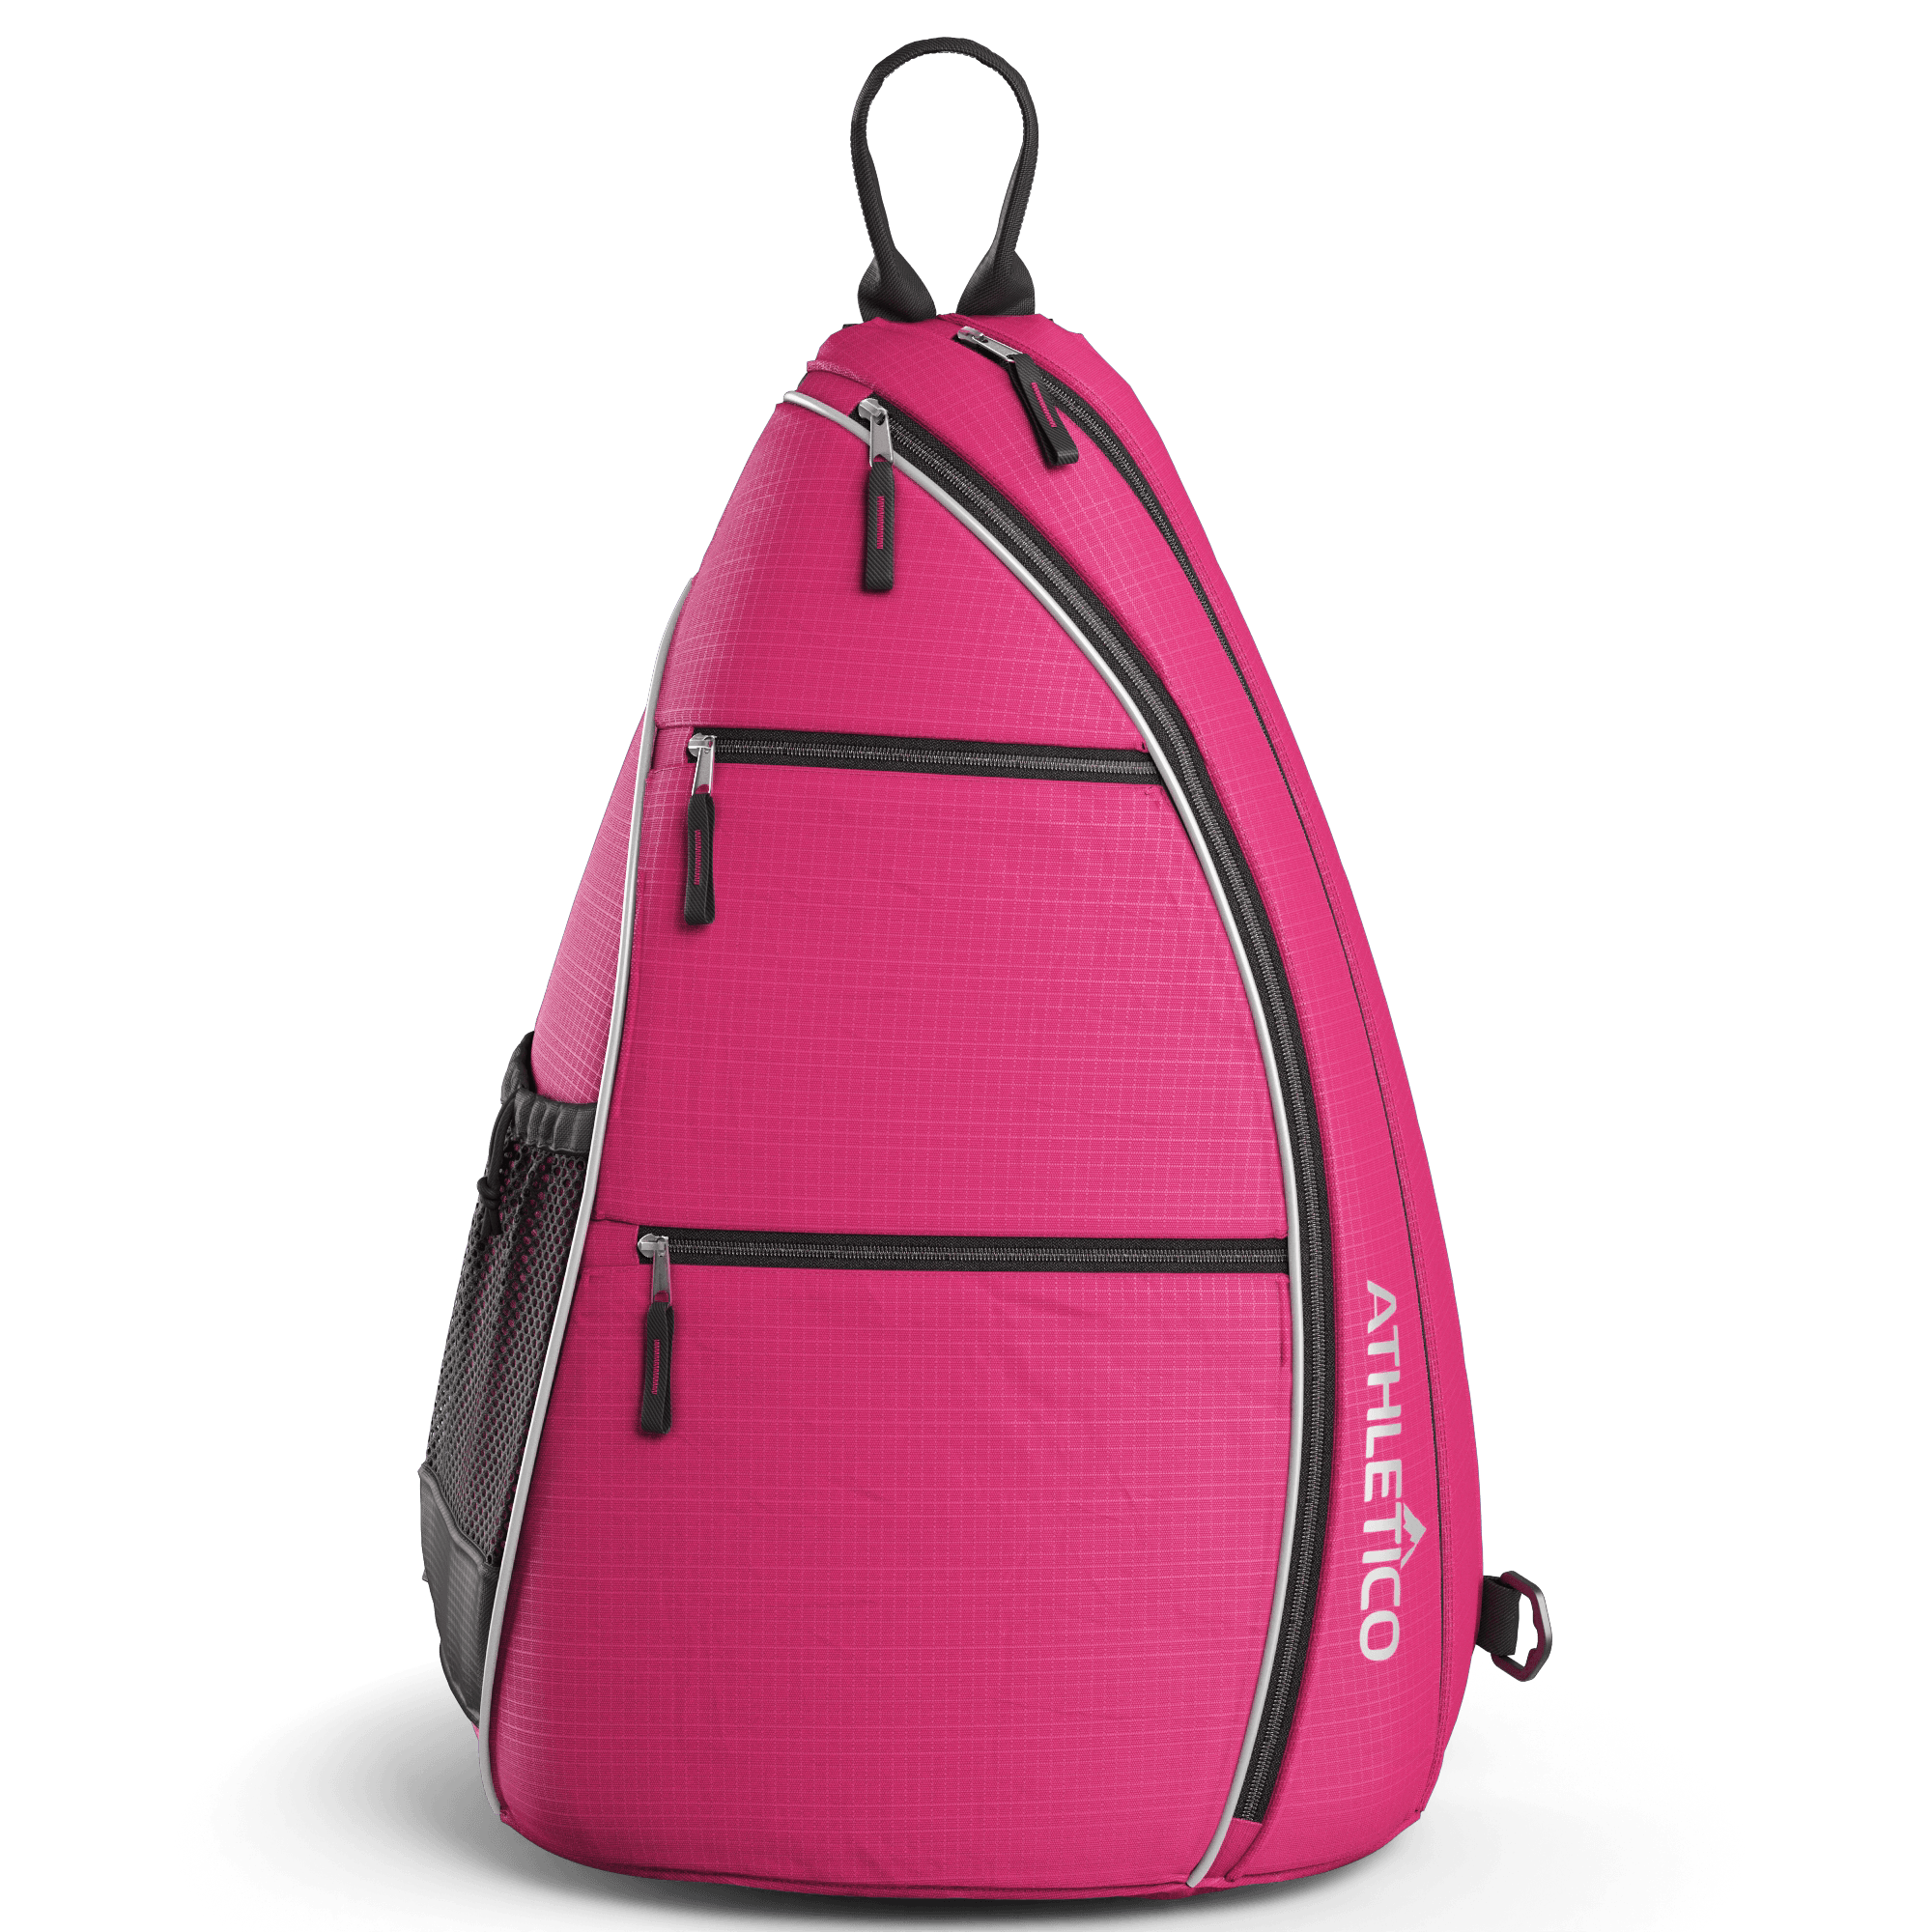 Athletico Sling Bag - Crossbody Backpack for Pickleball, Tennis, Racketball, and Travel for Men and Women (Pink)